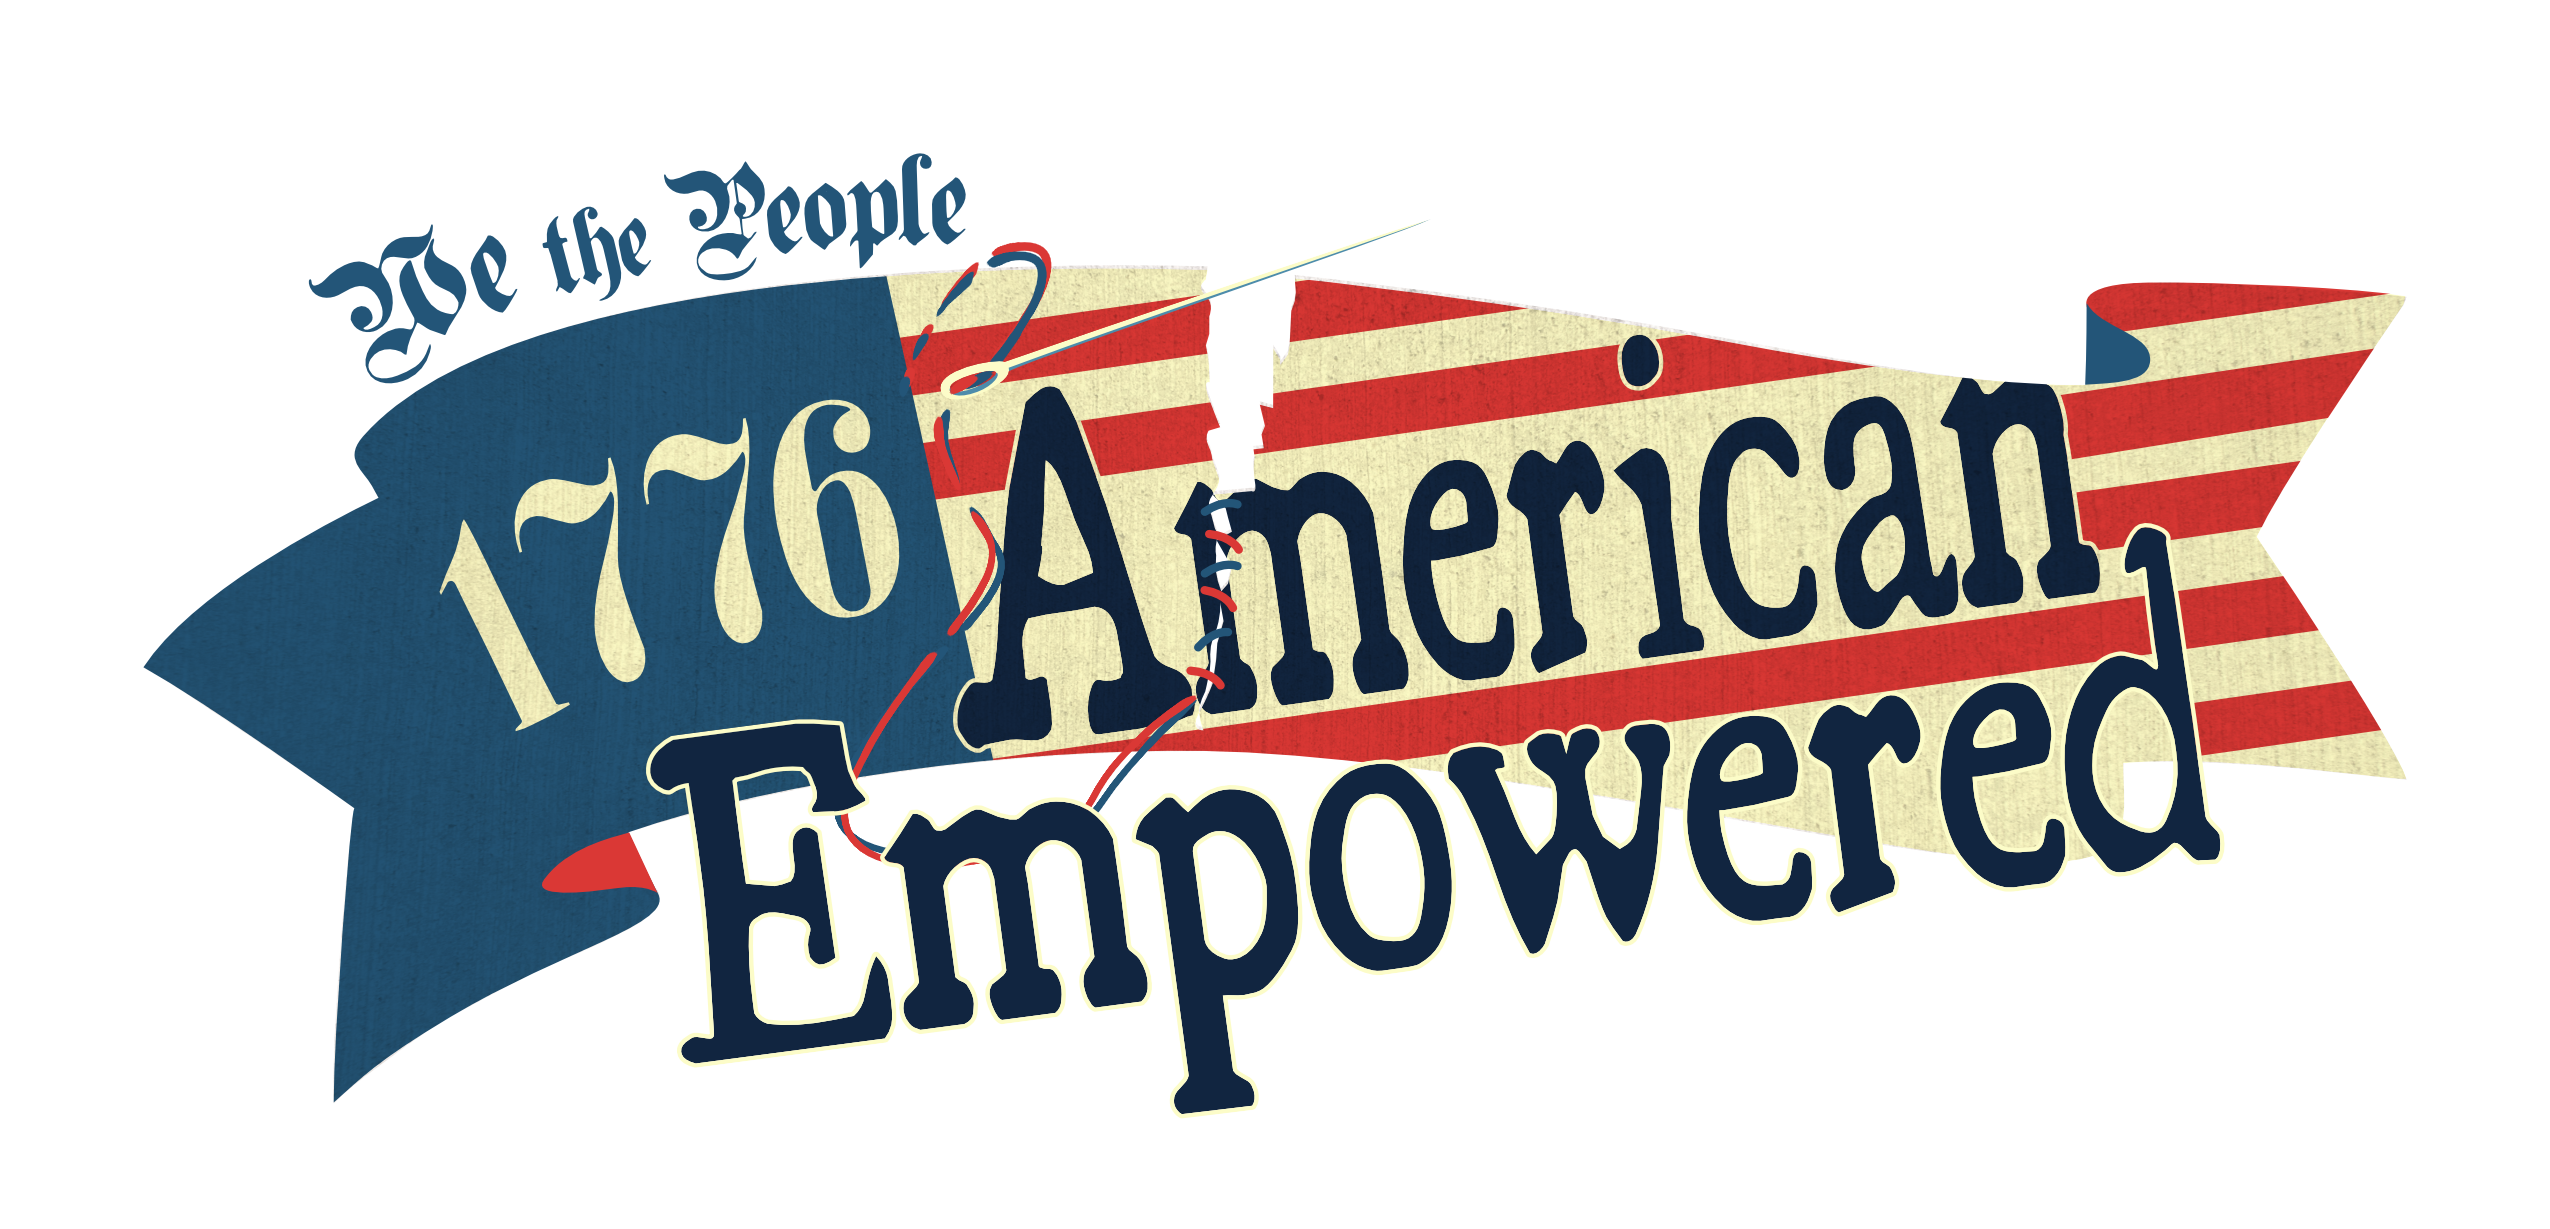 1776 American Empowered